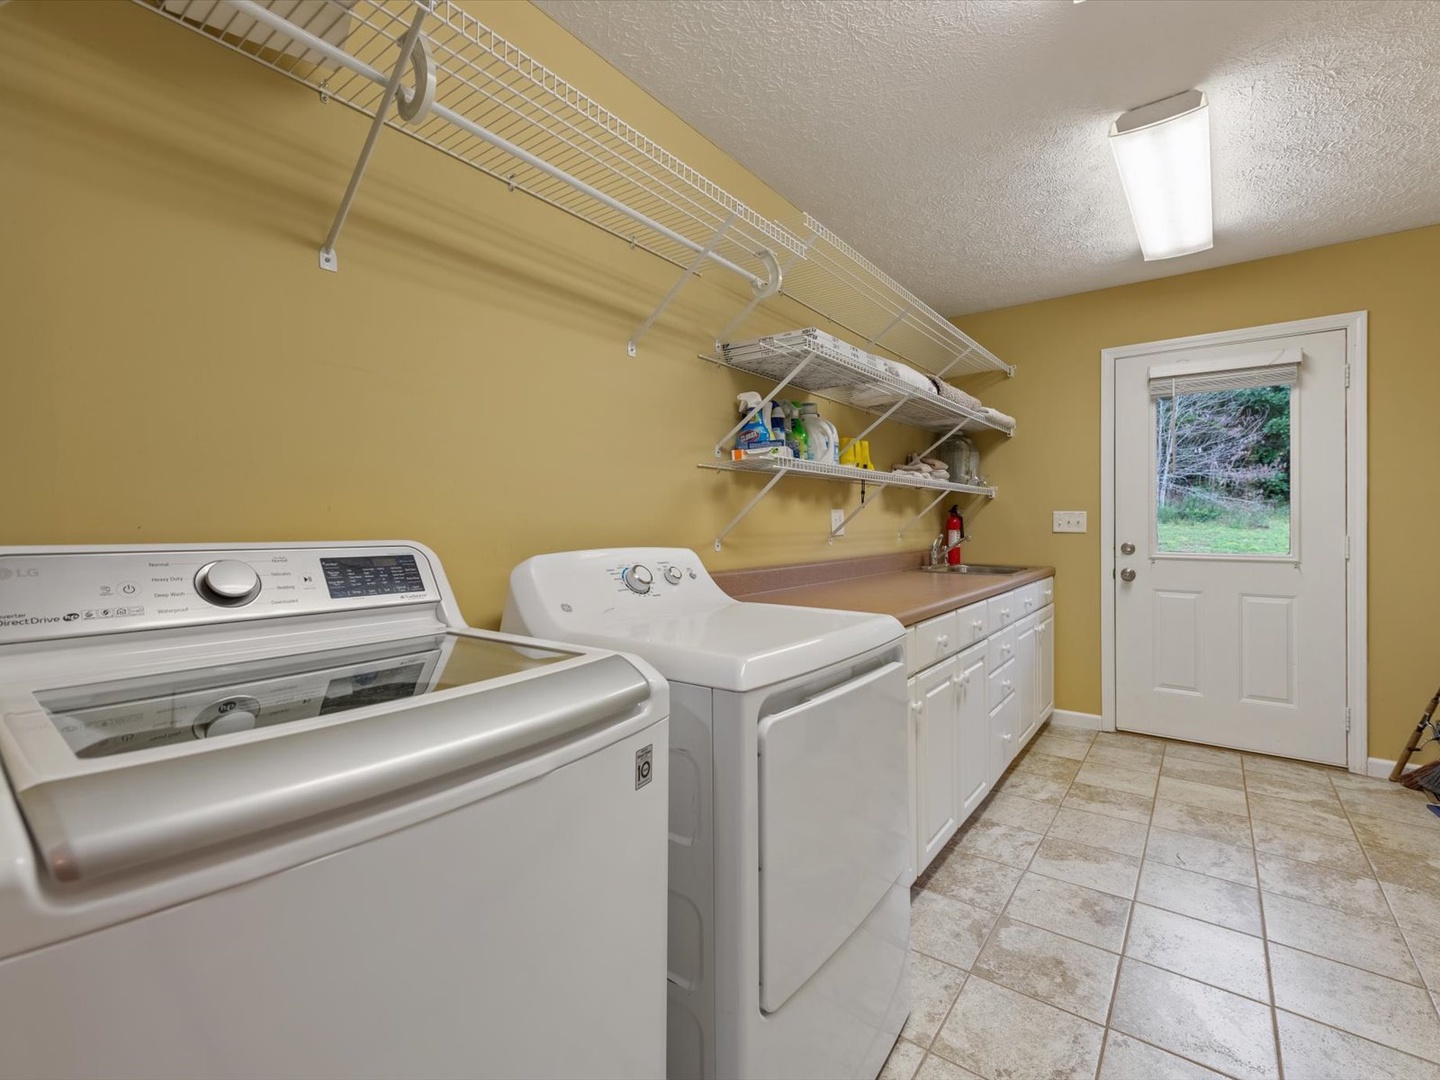 The River House - Entry Level Laundry Room